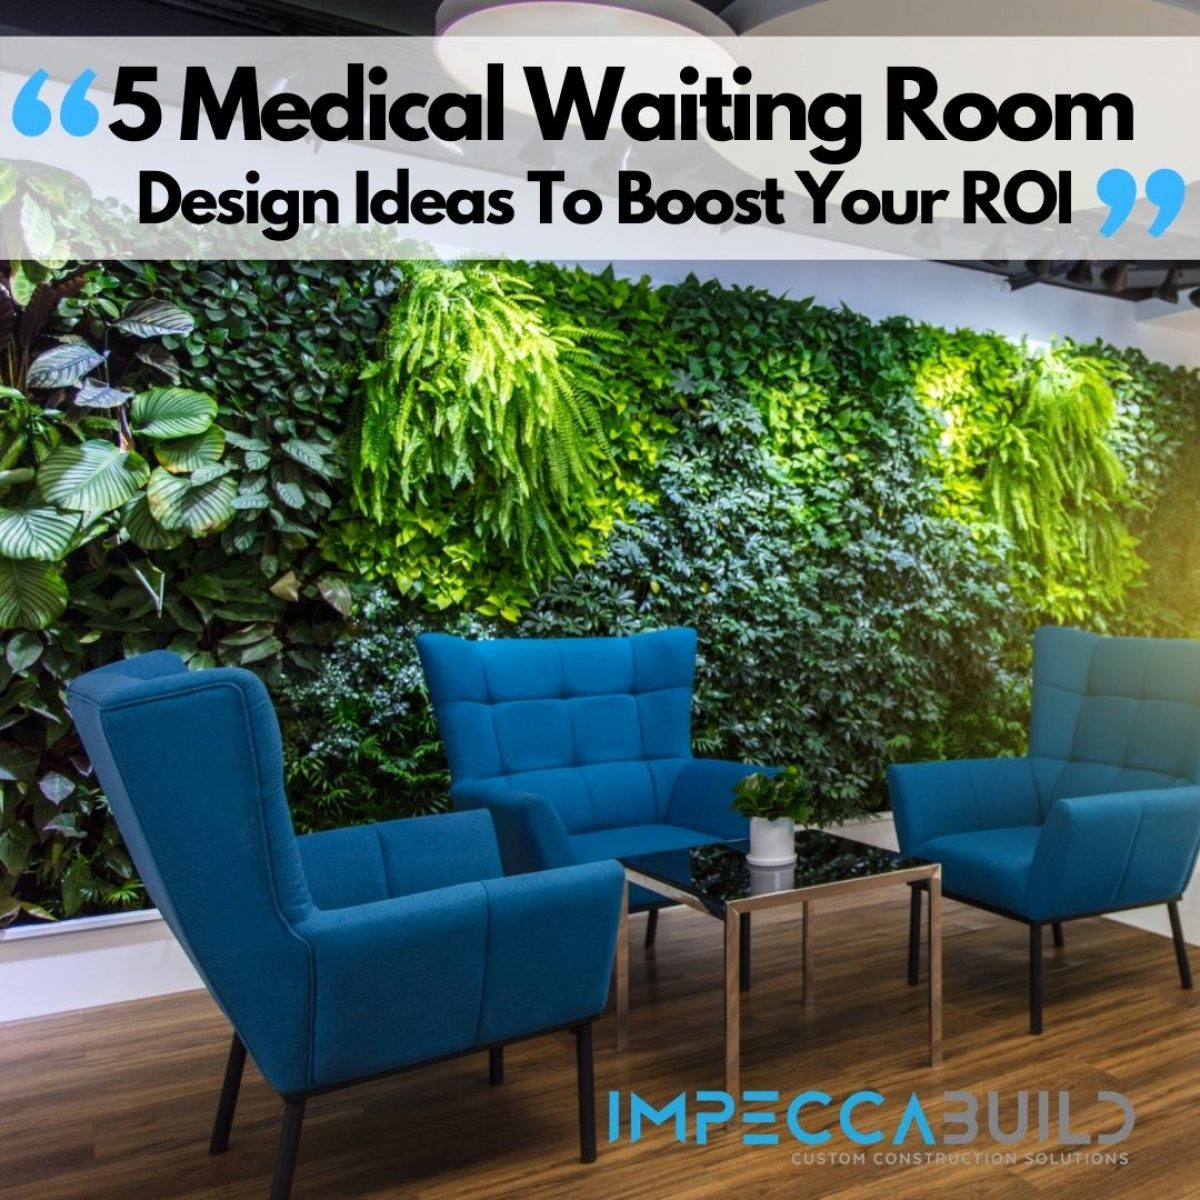 5 Medical Waiting Room Design Ideas That Boost Your ROI